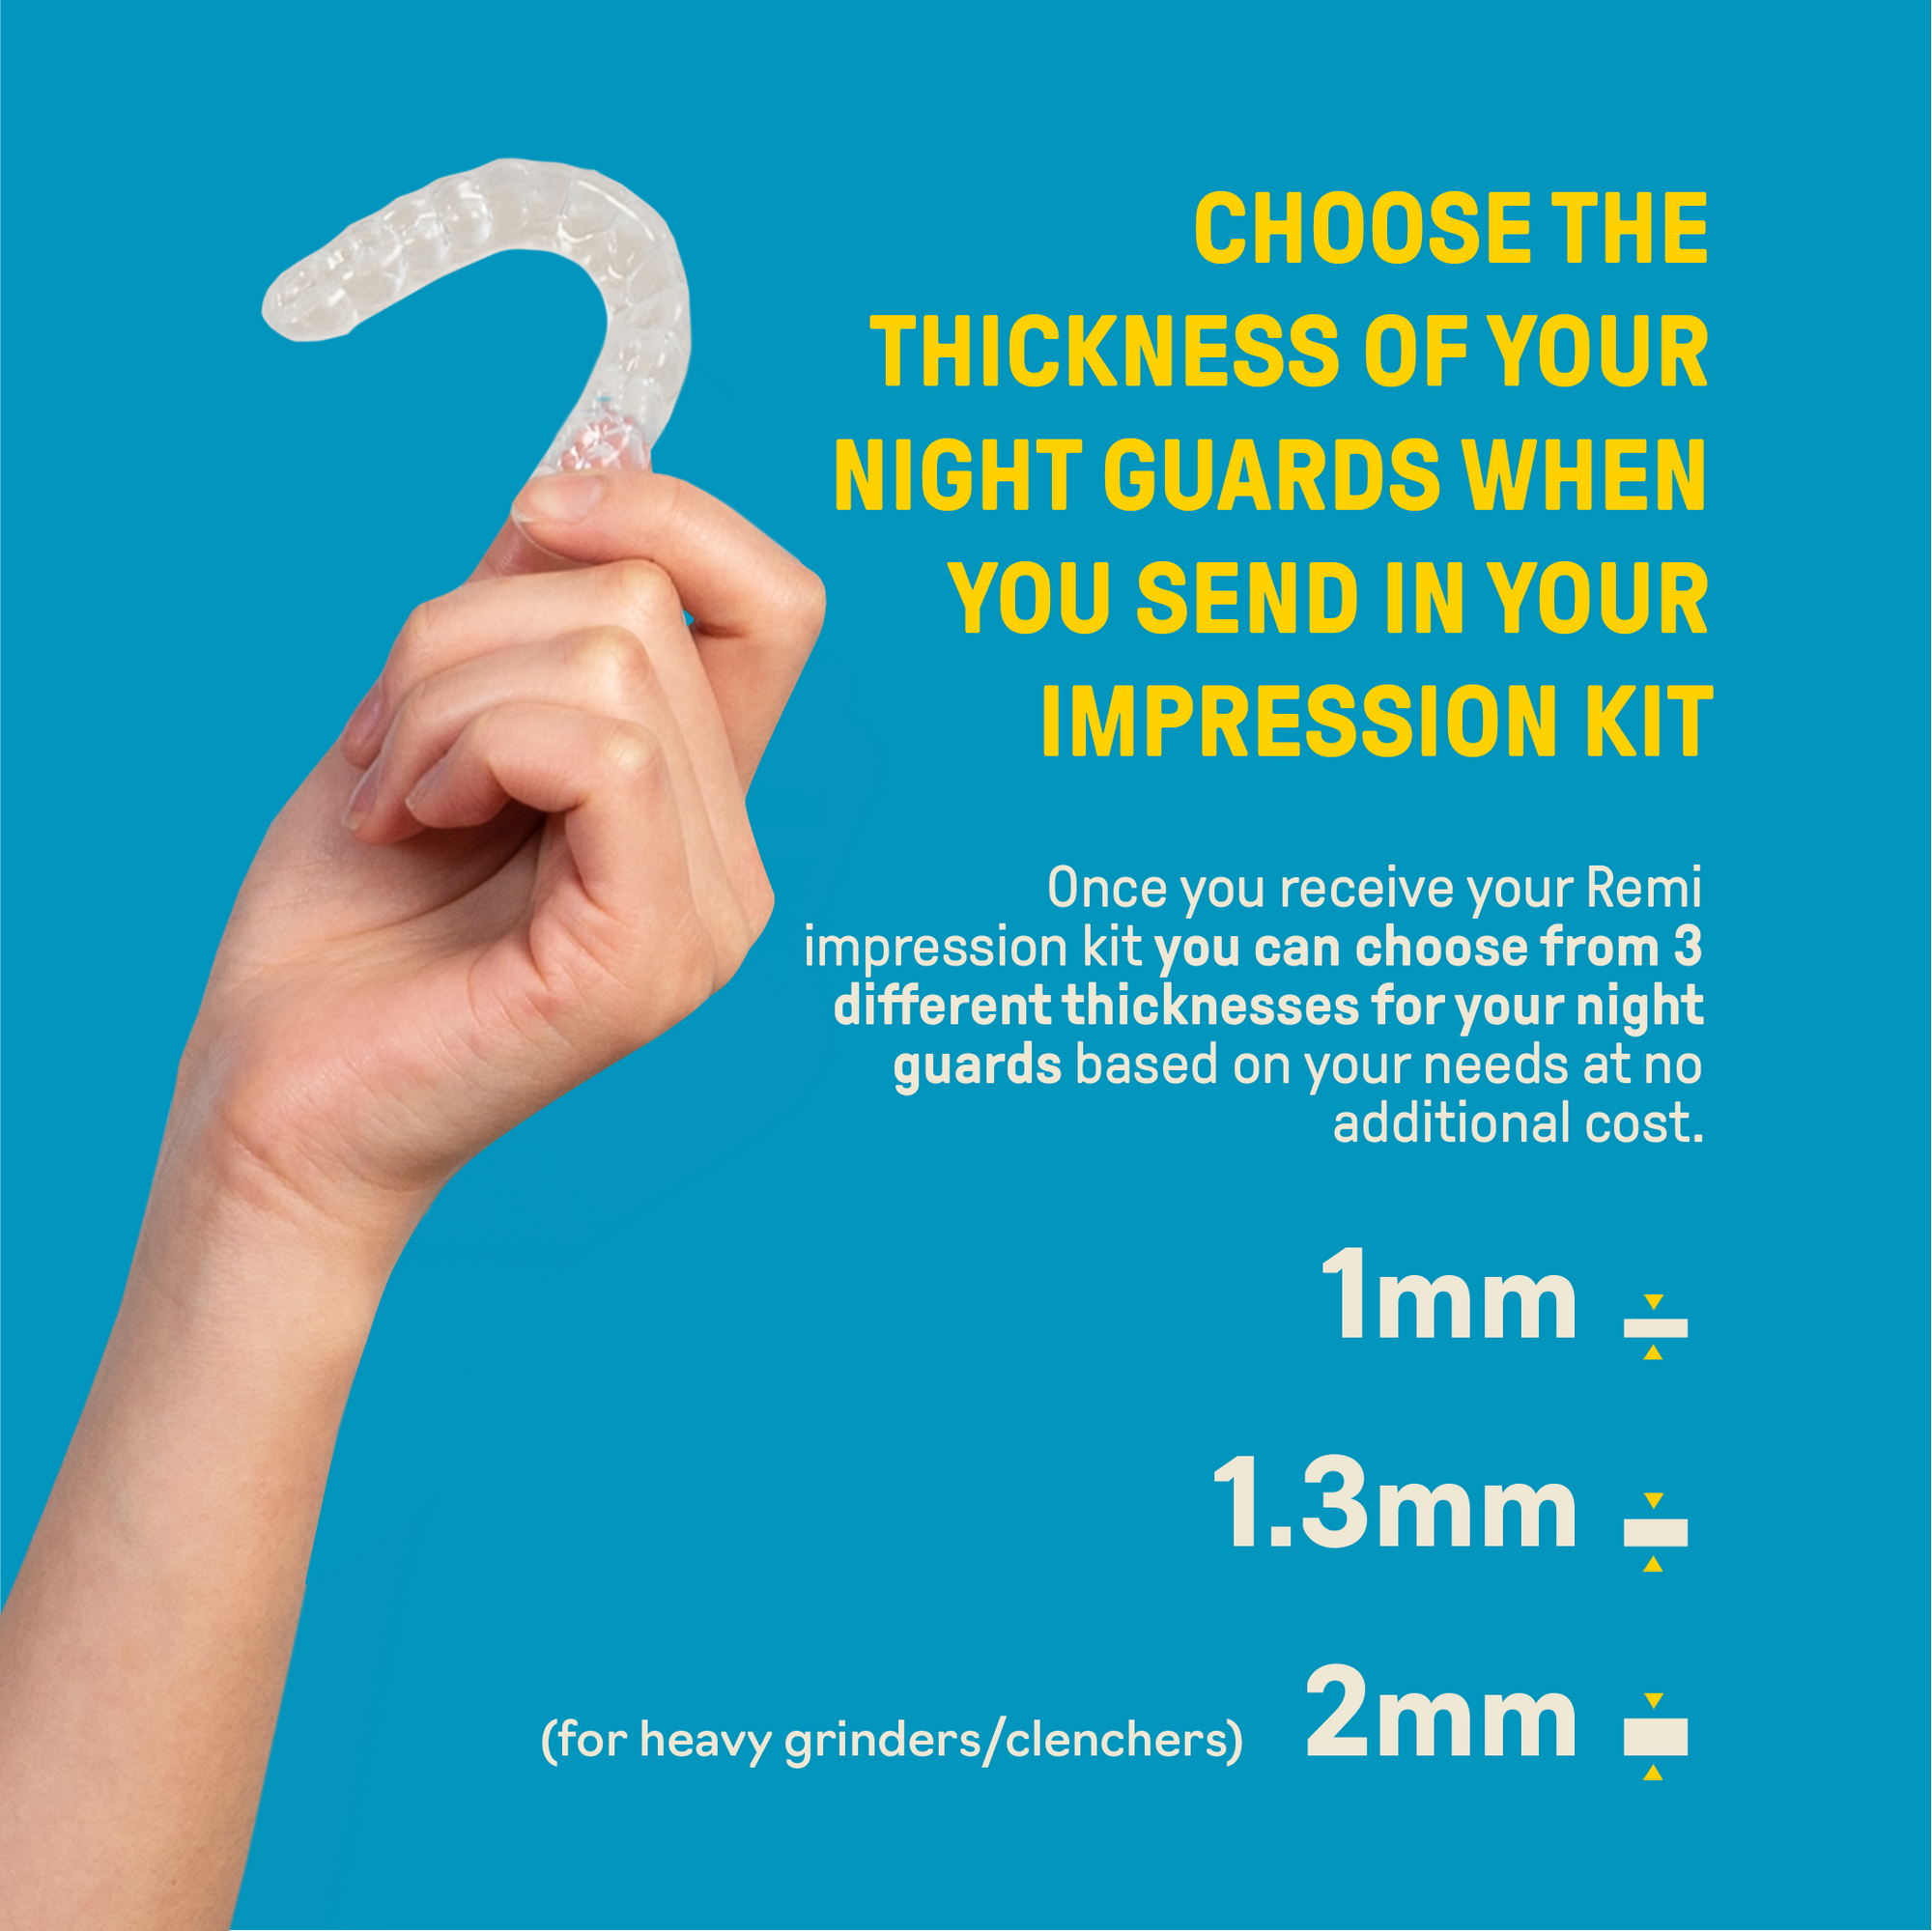 Choose the Thickness of your night guards when you send in your impression kit